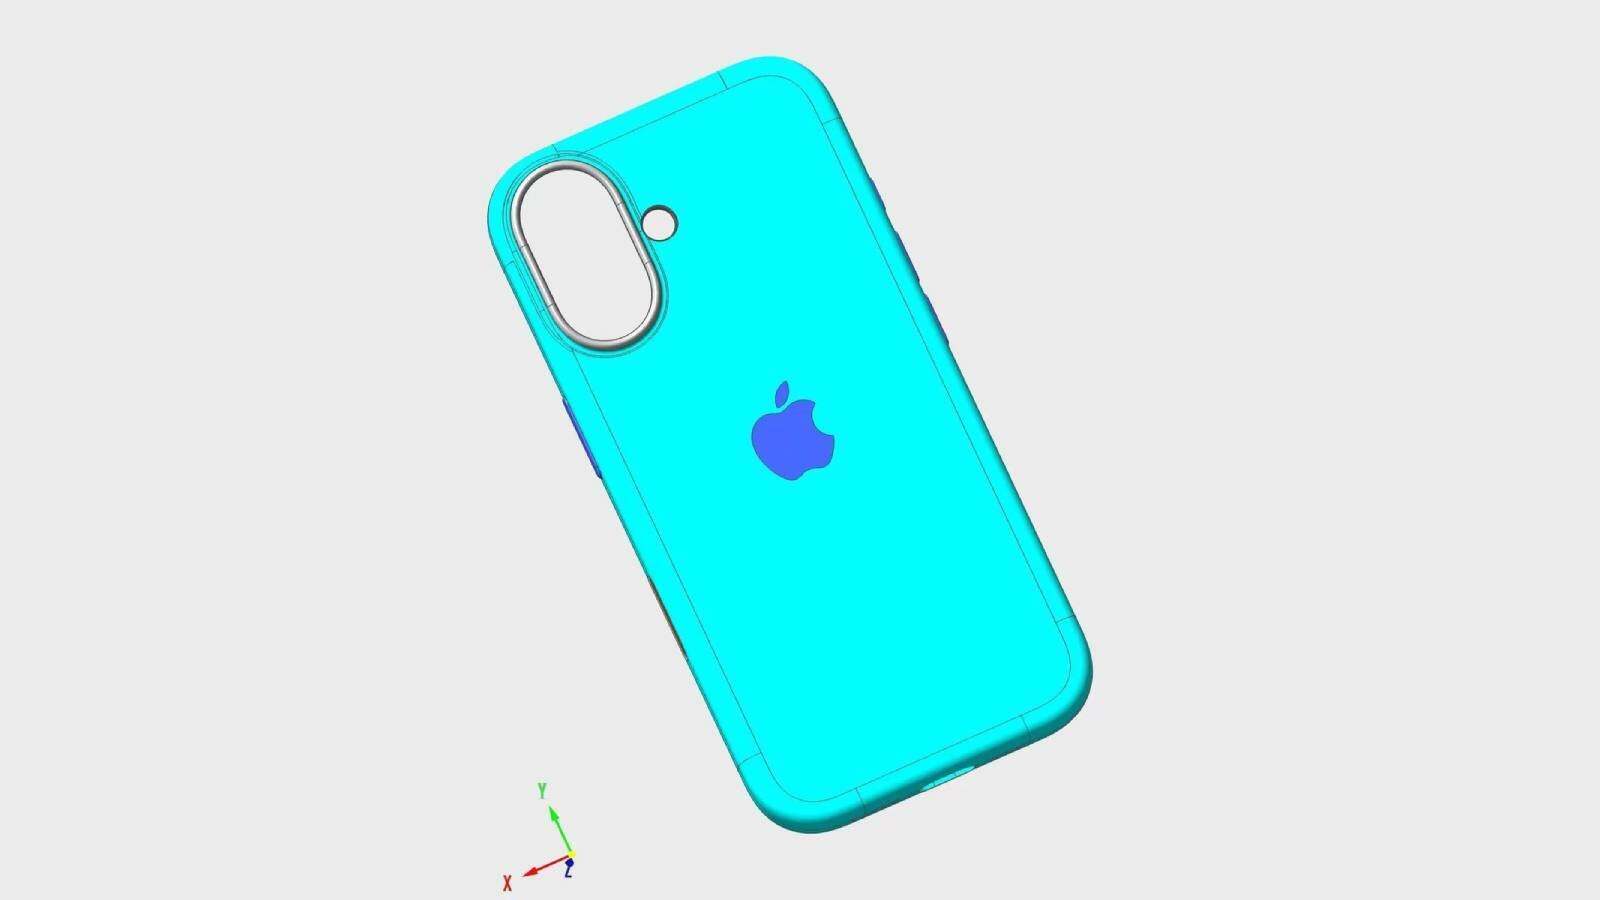 Leaked iPhone 16 CAD image highlights the rumored design changes - iPhone 16 will look radically different, a new leak confirms